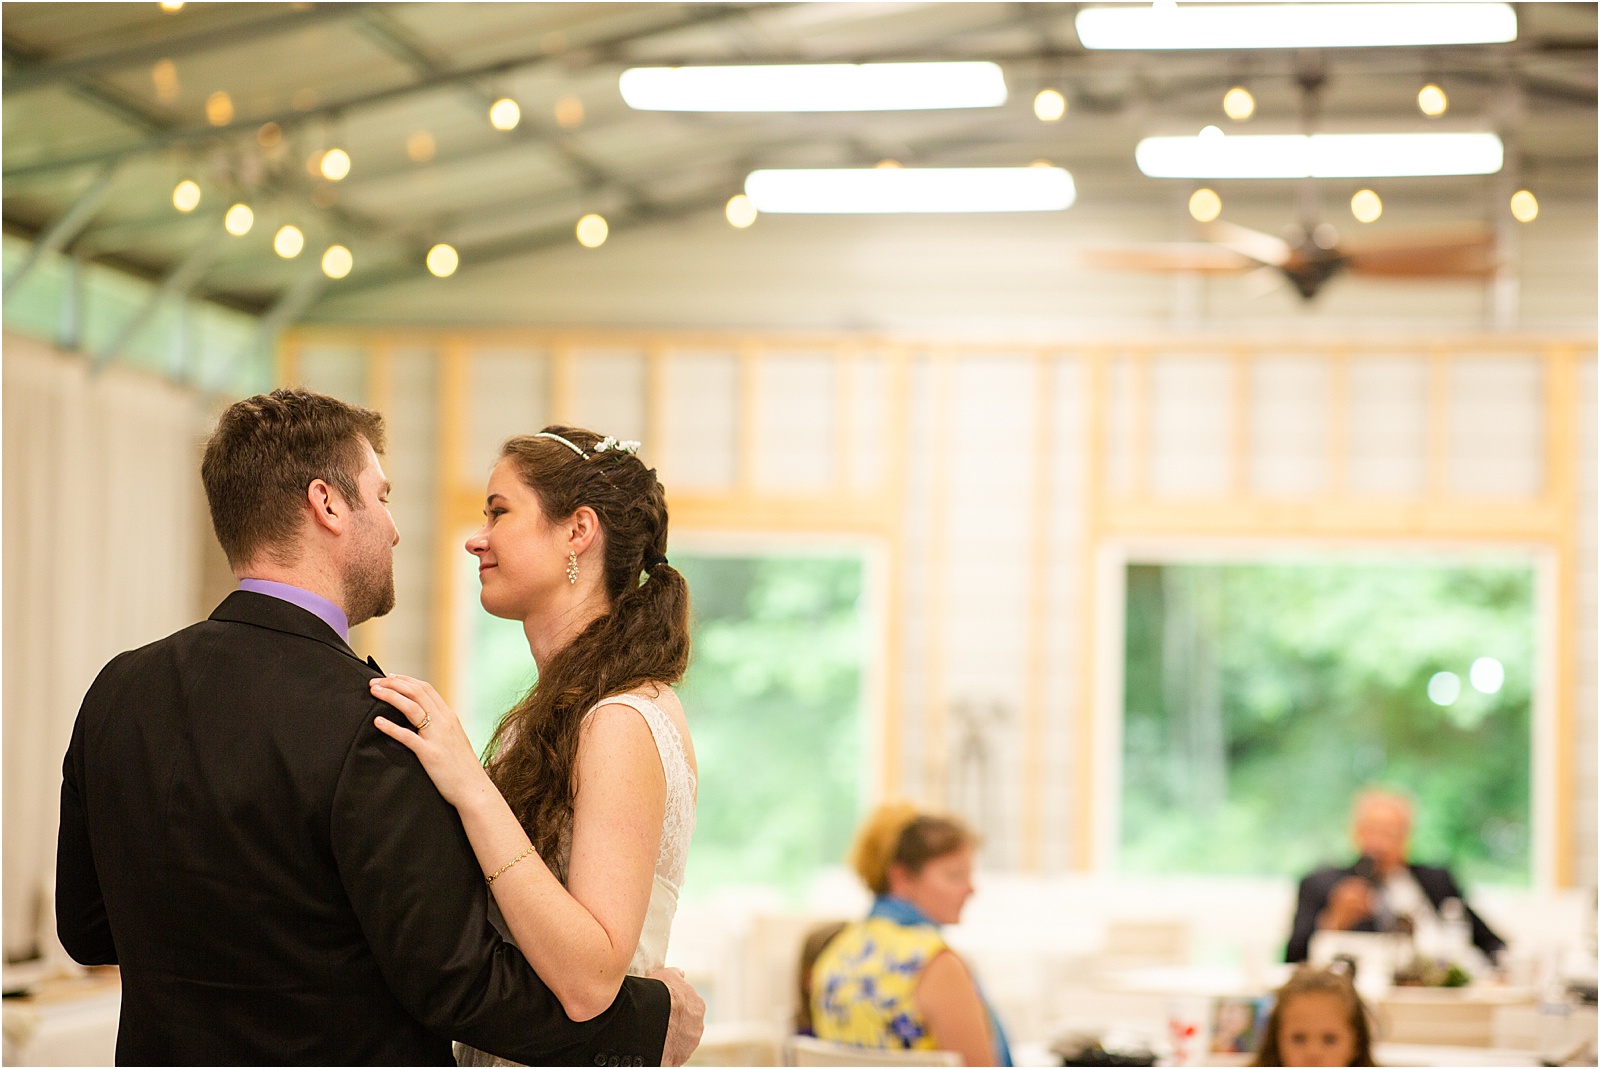 Couple's first dance in a barn venue